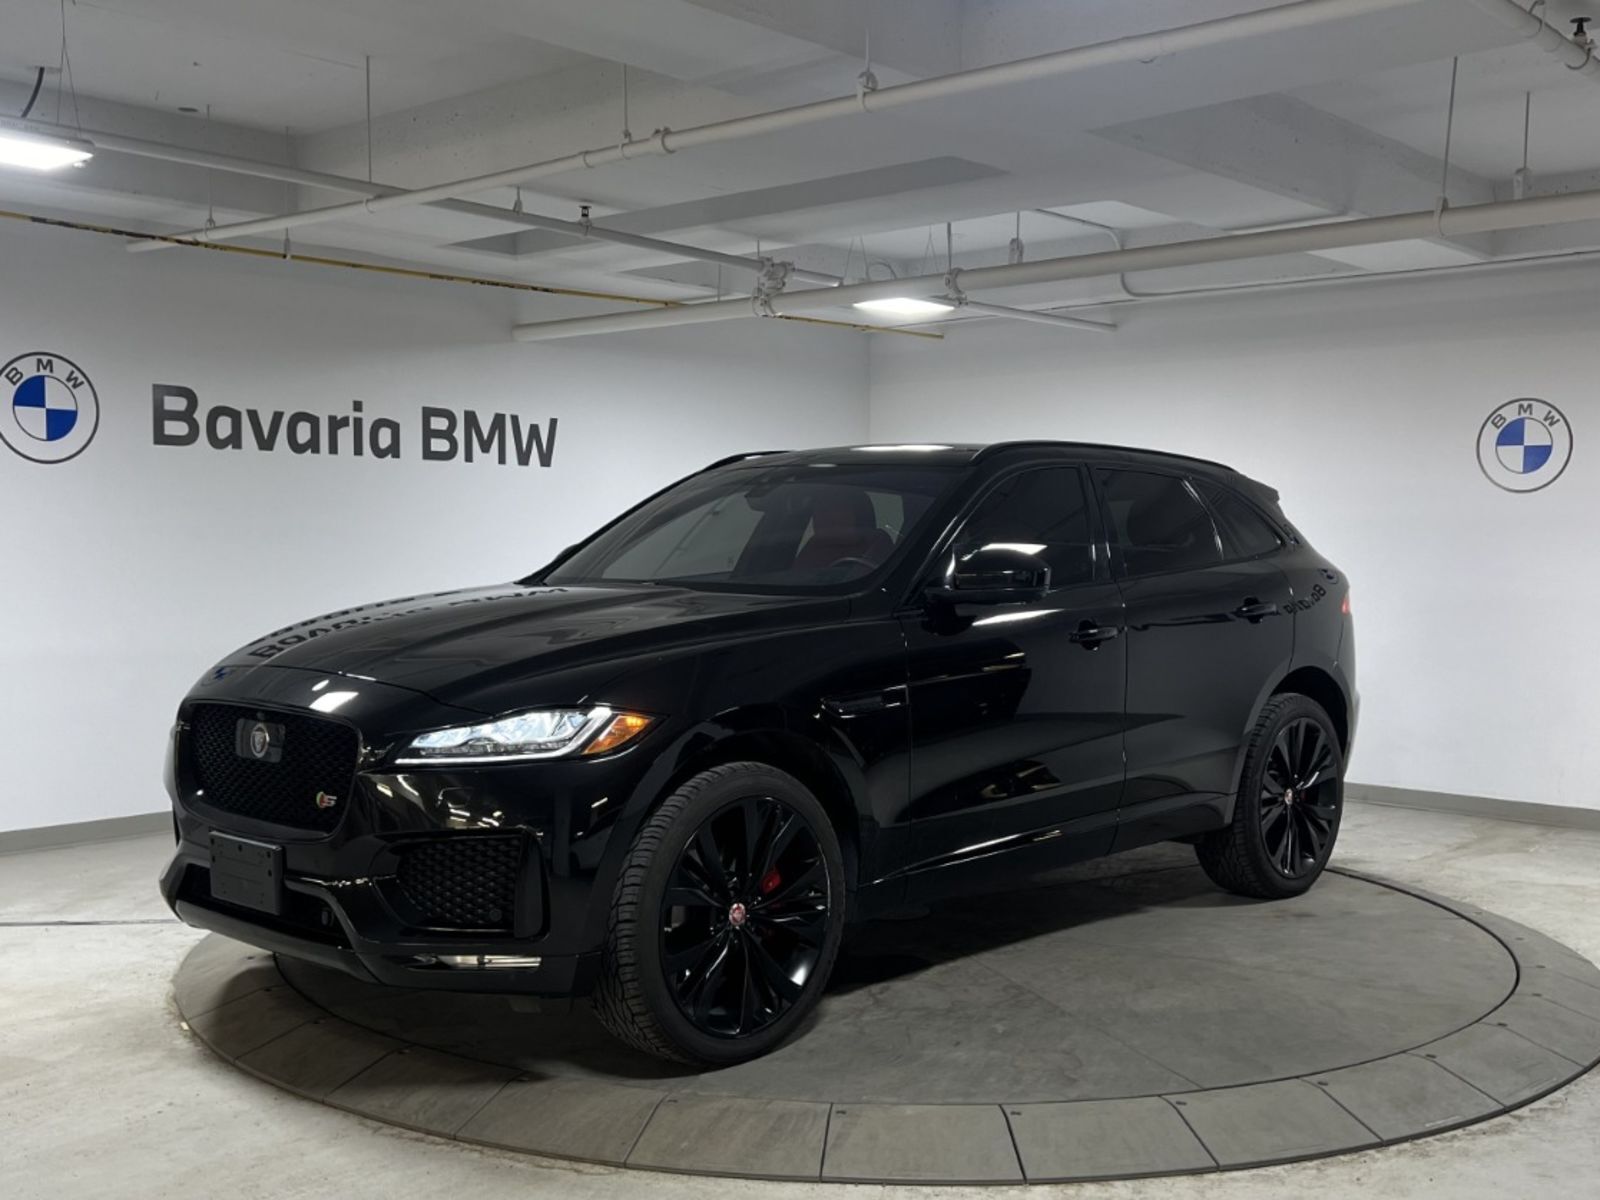 2019 Jaguar F-Pace S | Leather Seats | Heated & Cooled Seats | Pano S